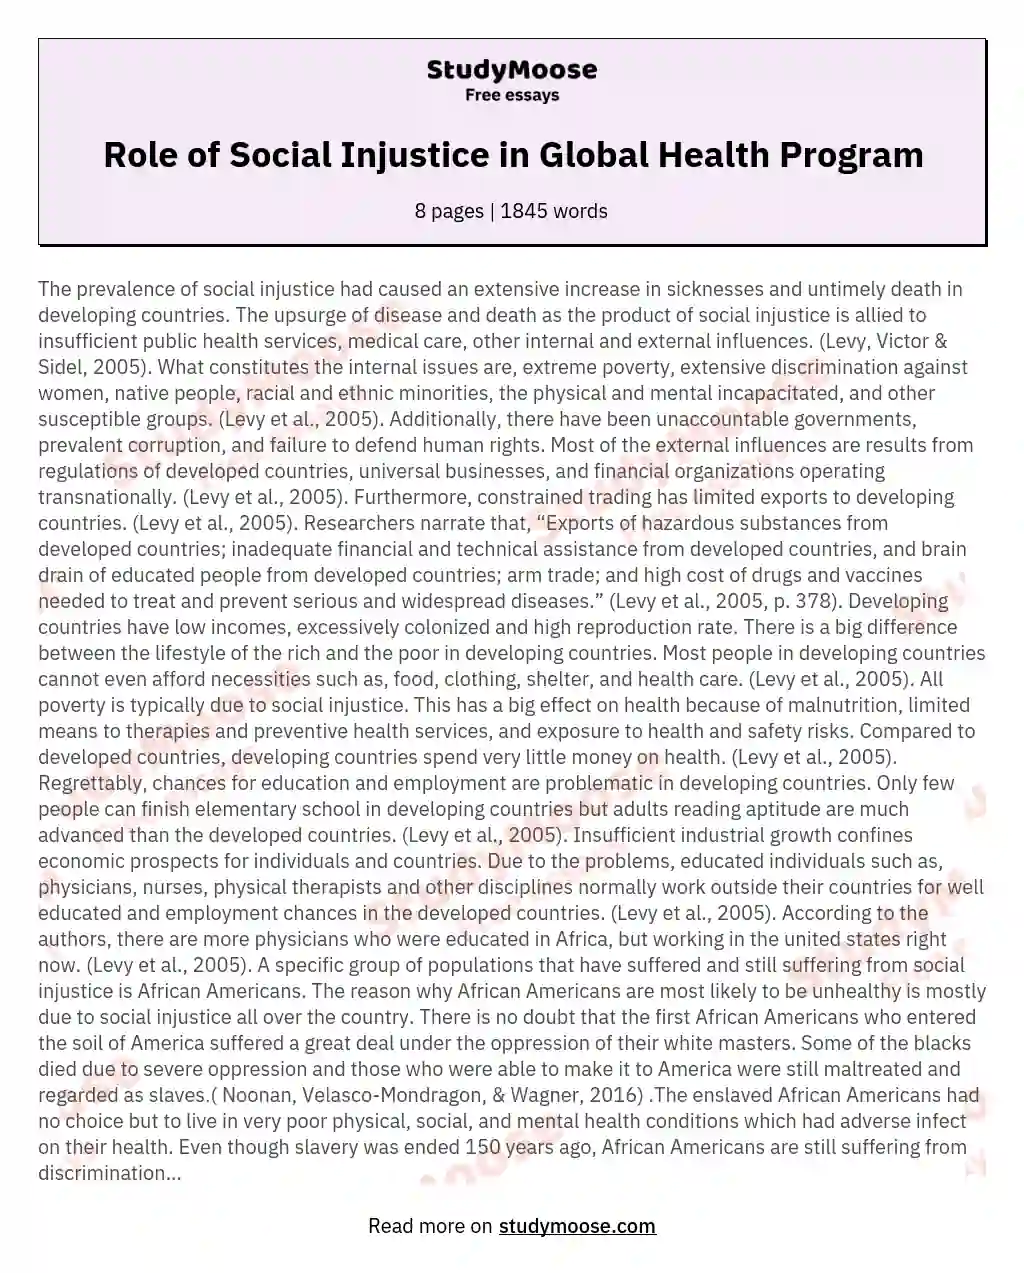 Role of Social Injustice in Global Health Program